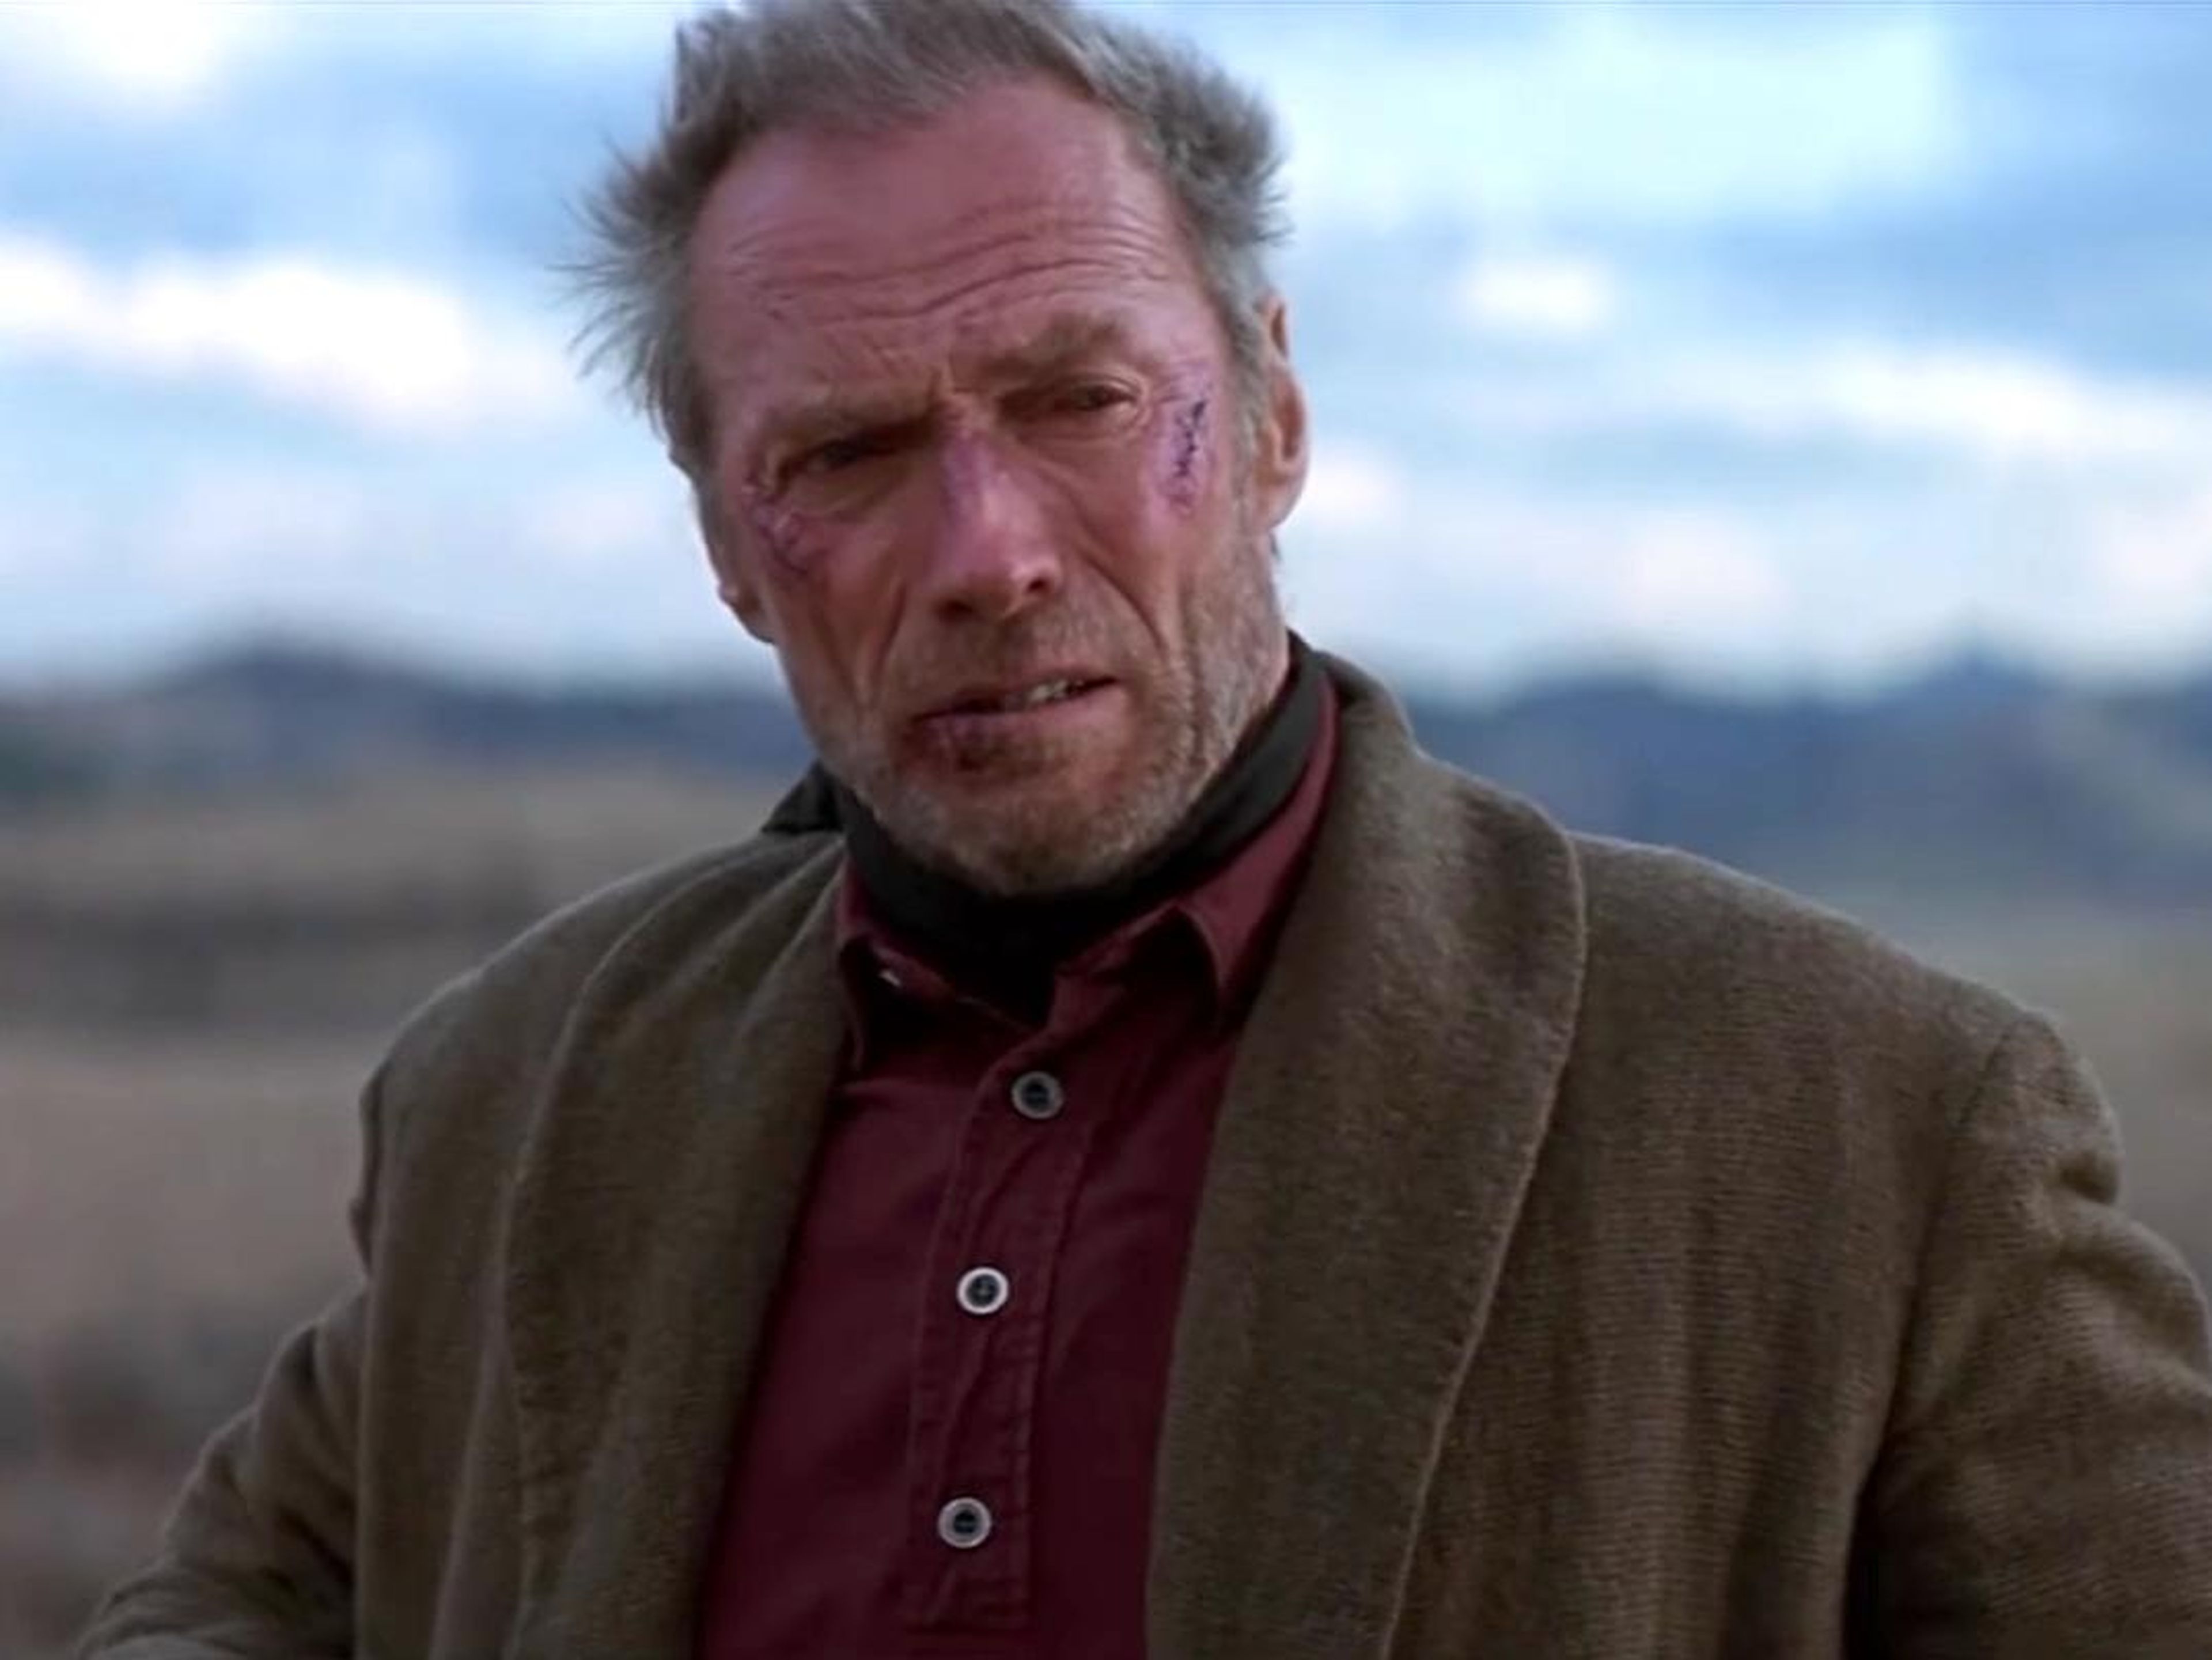 "Unforgiven" was directed by Clint Eastwood.